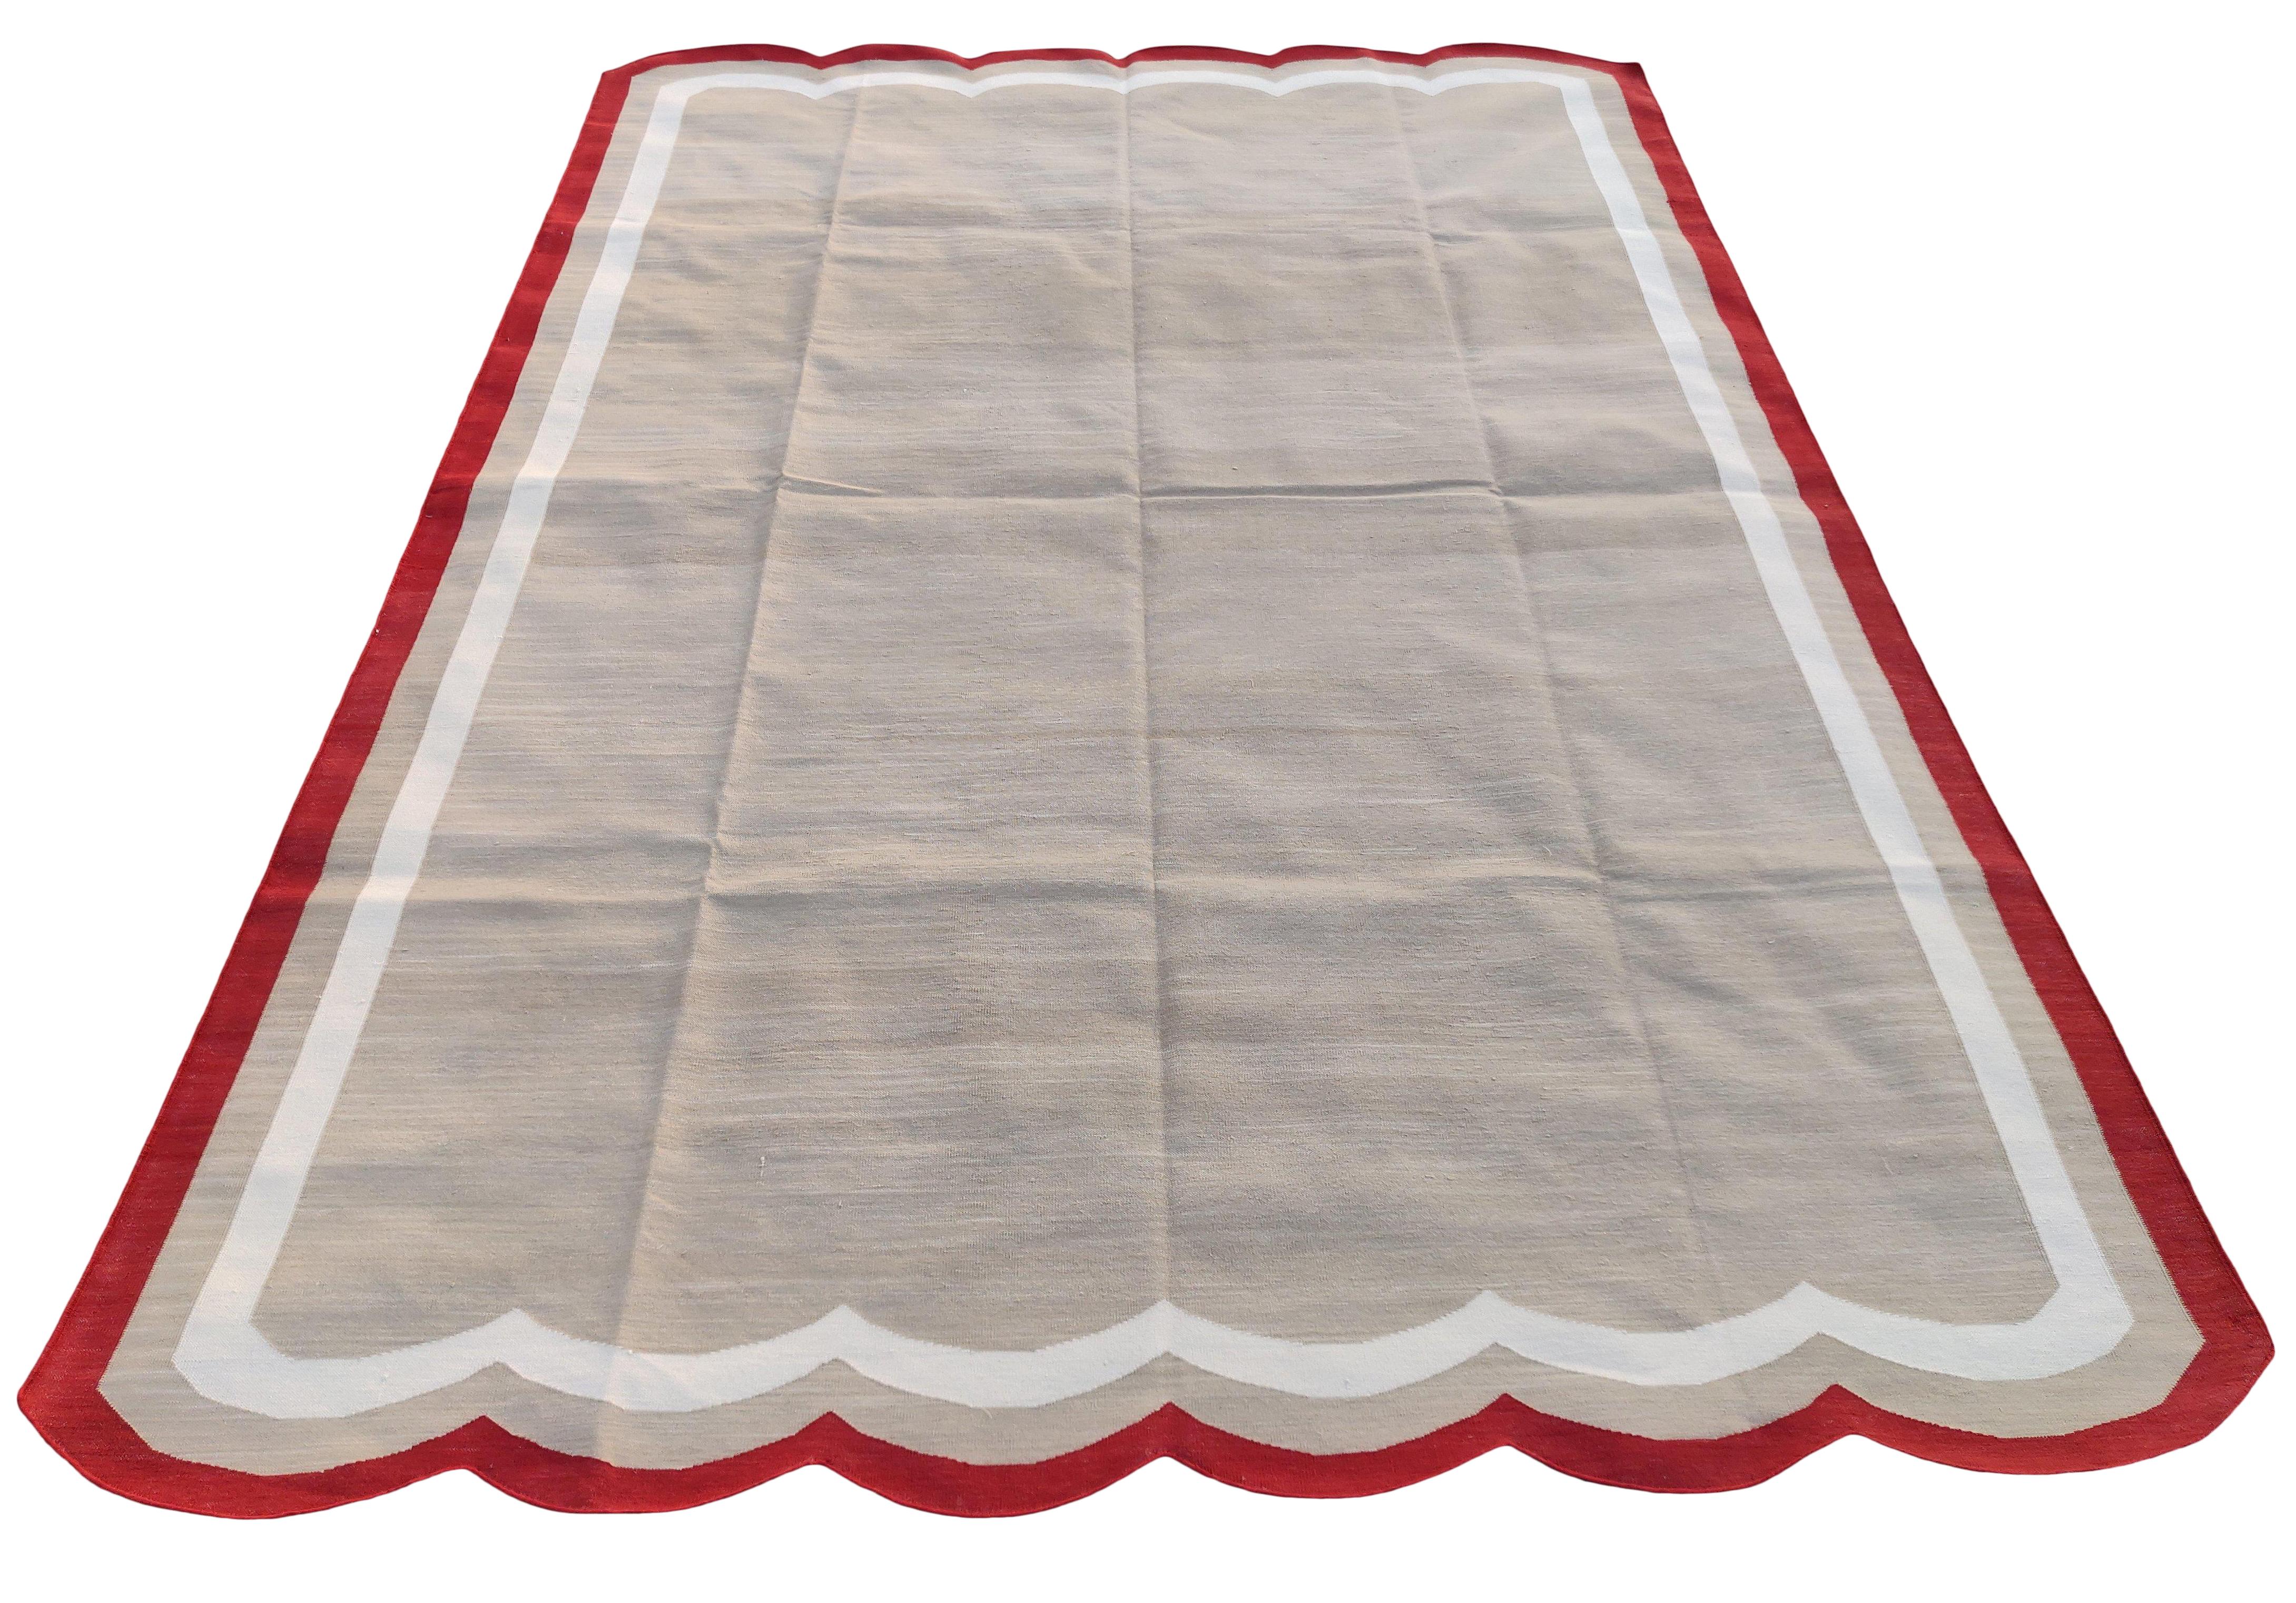 Cotton Vegetable Dyed Cream, Beige And Red Two Sided Scalloped Rug-6'x9' 
(Scallops runs on 6 Feet Sides)
These special flat-weave dhurries are hand-woven with 15 ply 100% cotton yarn. Due to the special manufacturing techniques used to create our